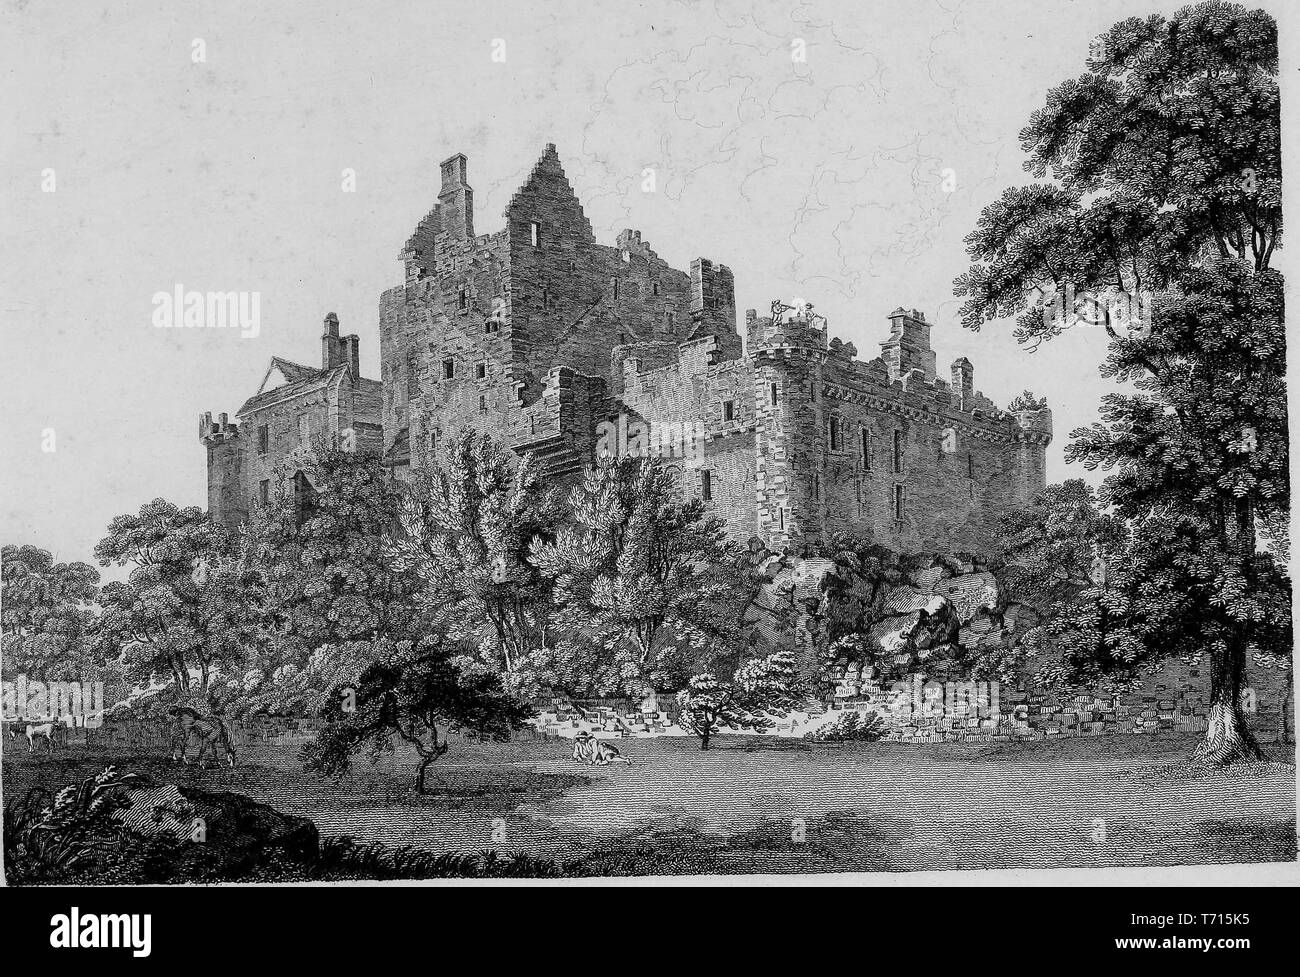 Engraving of the Craigmillar Castle in Edinburgh, Scotland, from the book 'Antiquities of Great Britain' by William Byrne and Thomas Hearne, 1825. Courtesy Internet Archive. () Stock Photo